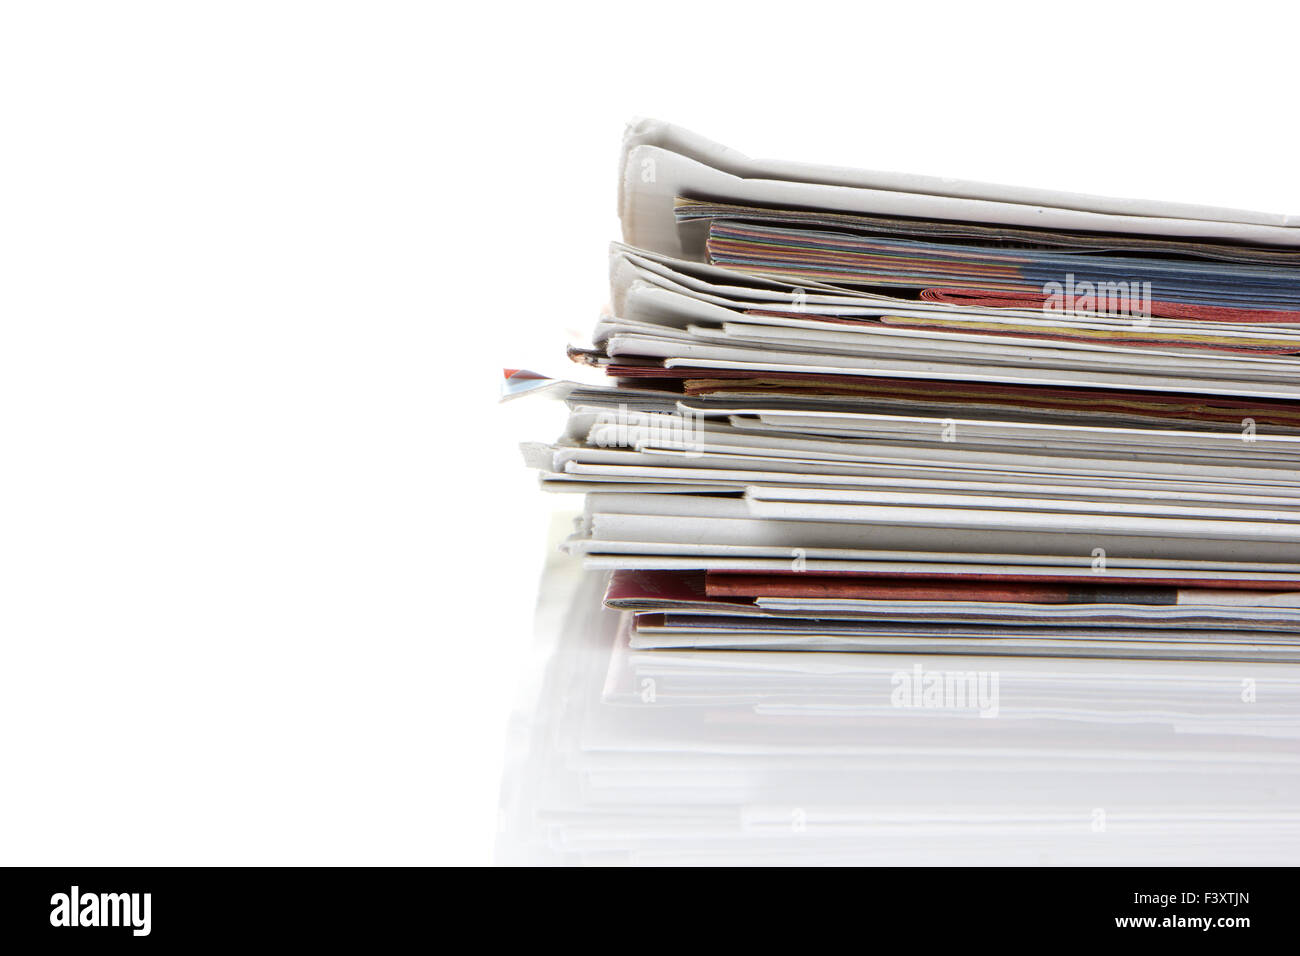 several newspapers, journals stacked on white Stock Photo